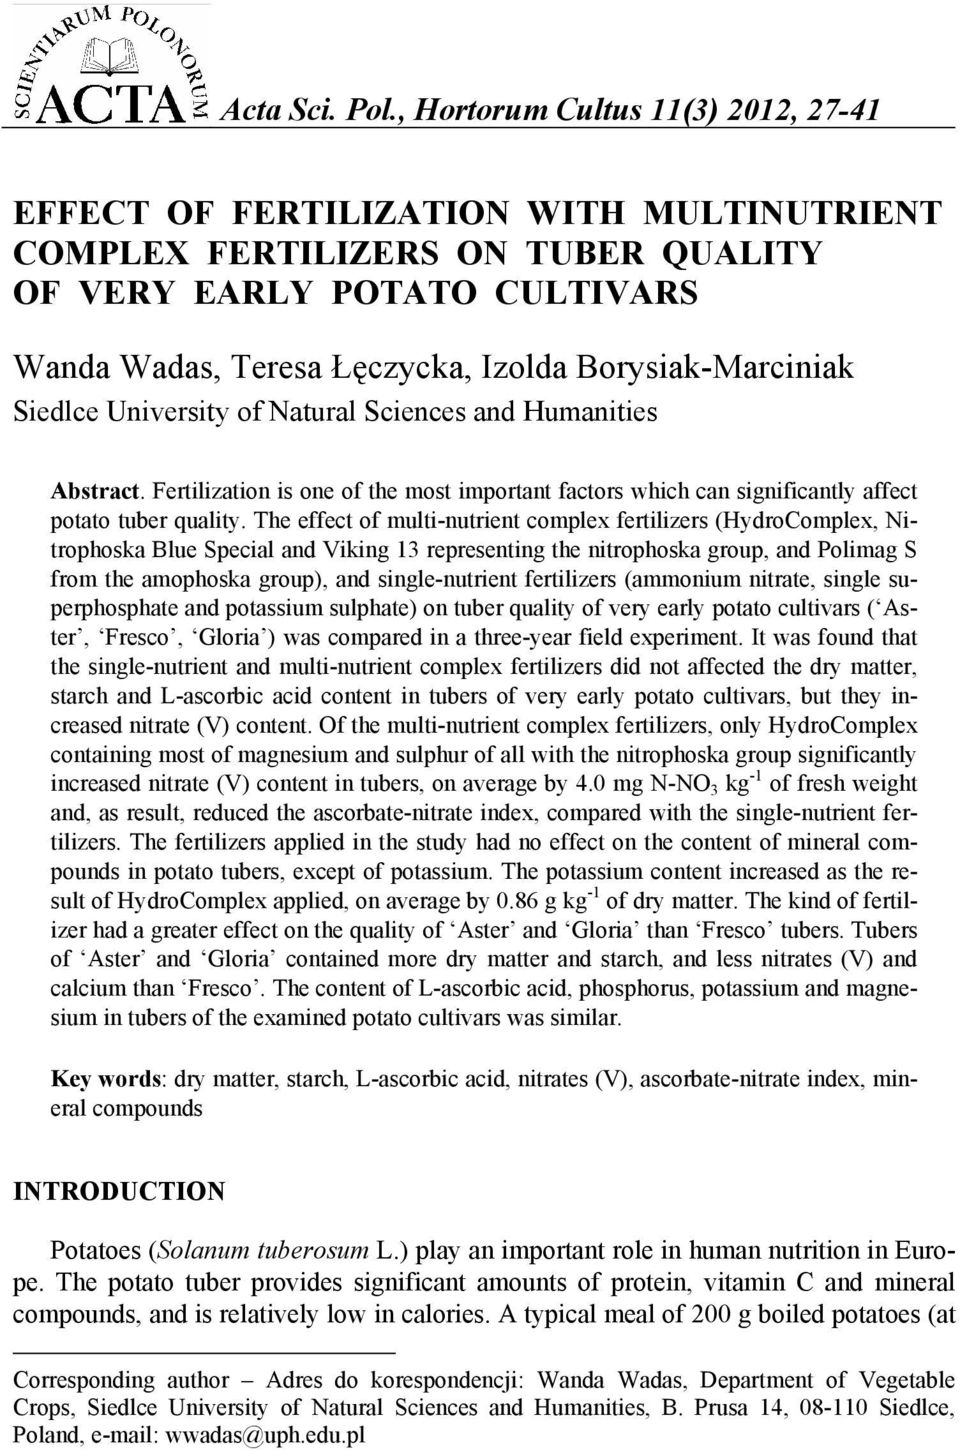 Borysiak-Marciniak Siedlce University of Natural Sciences and Humanities Abstract. Fertilization is one of the most important factors which can significantly affect potato tuber quality.